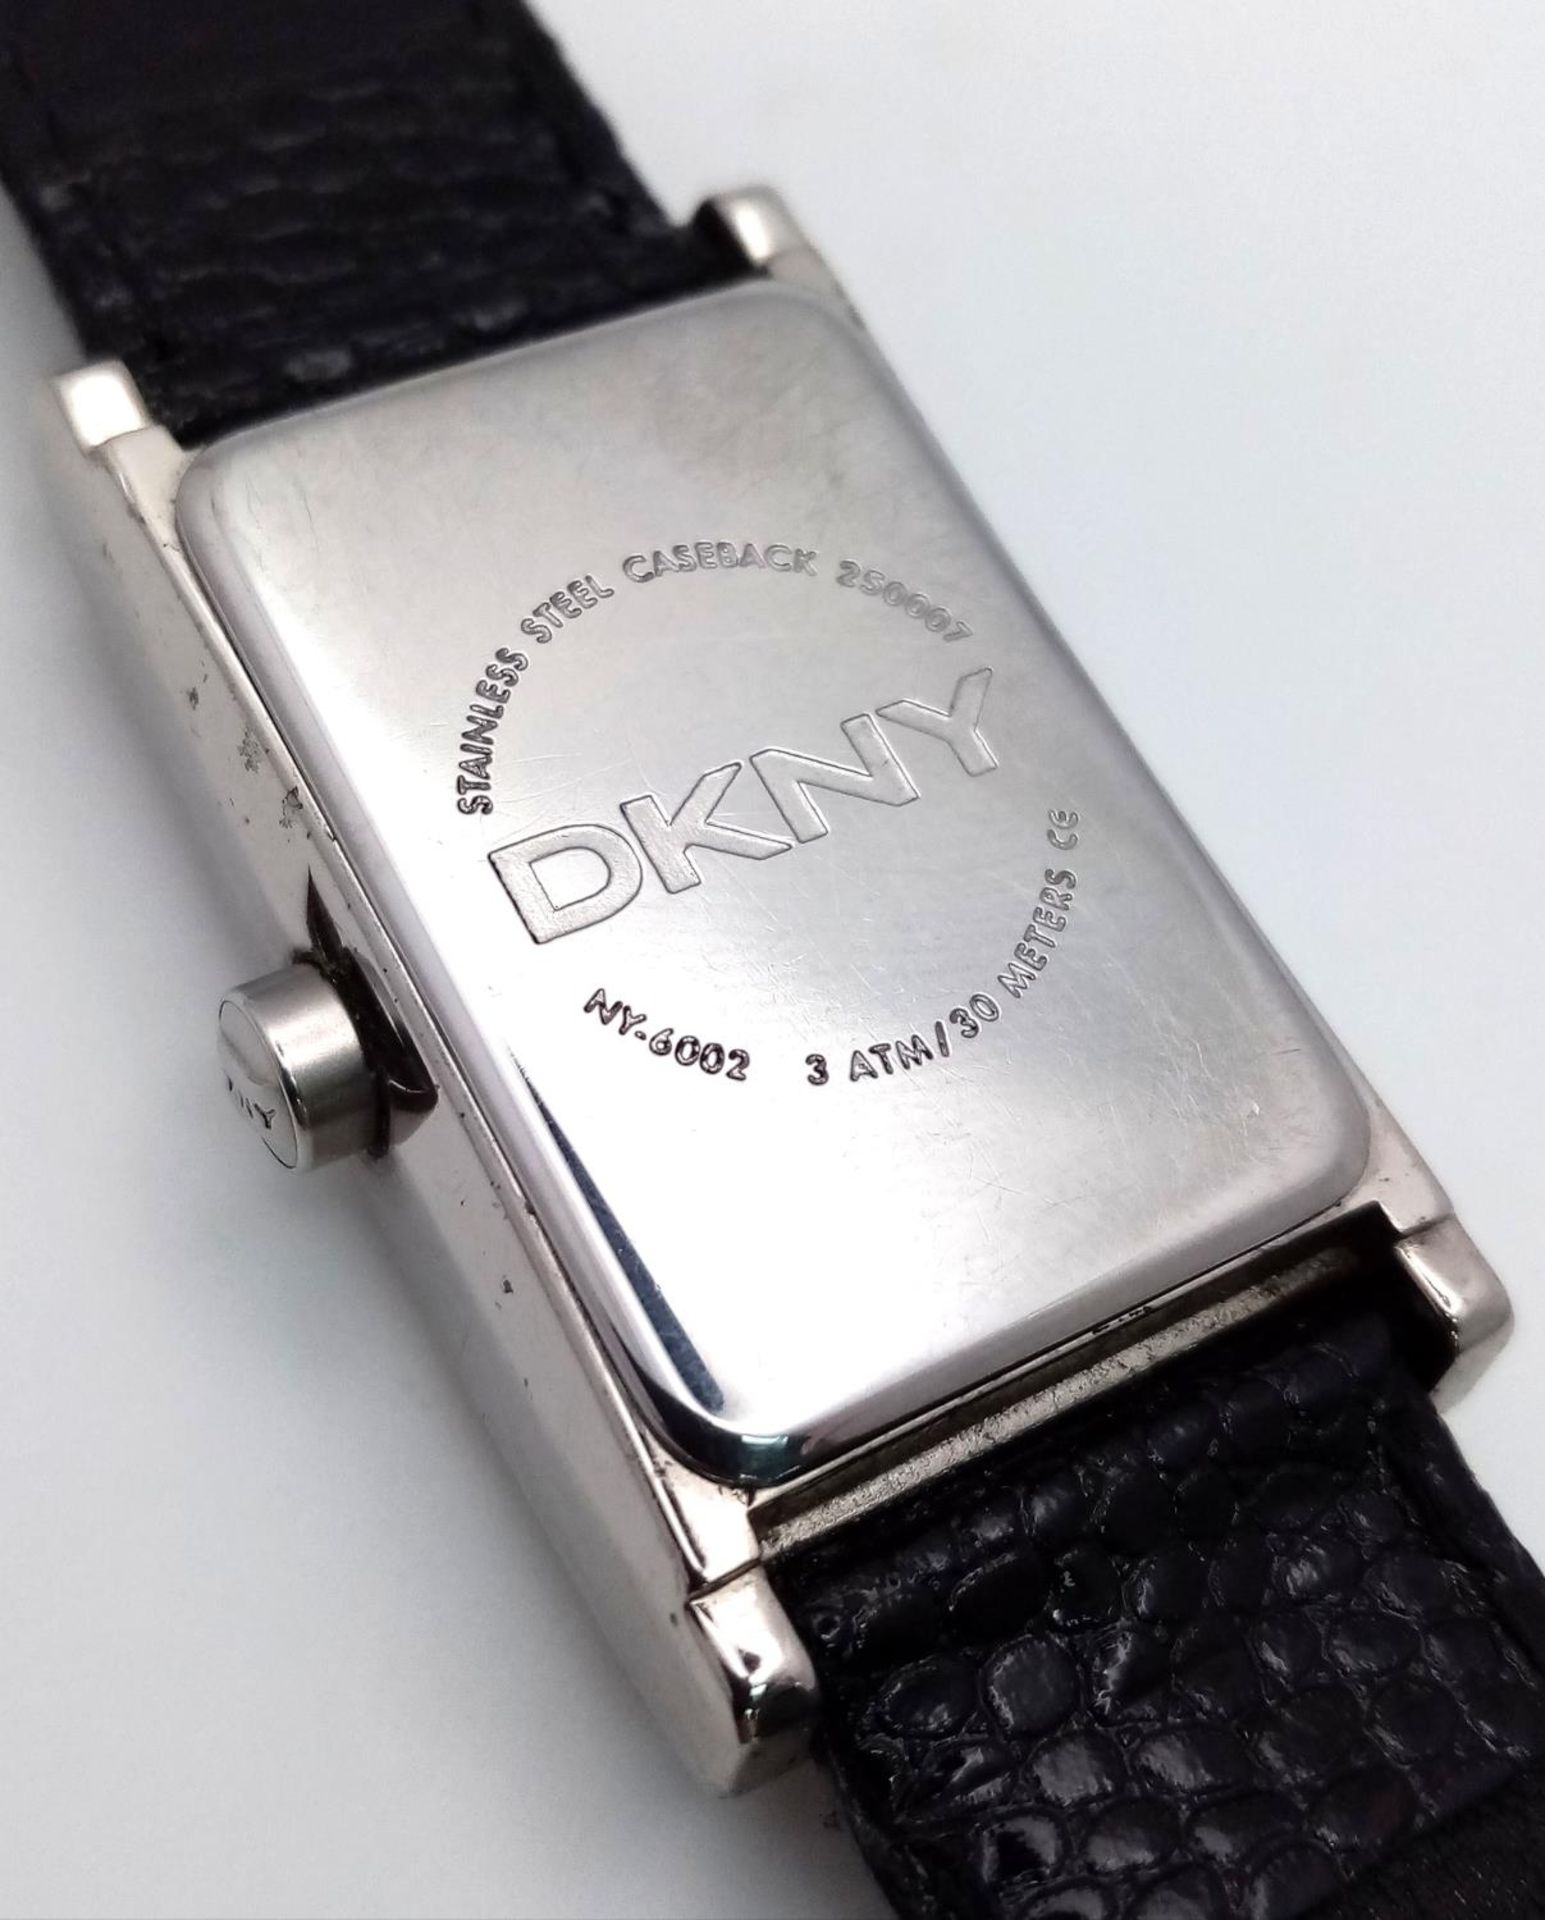 A DKNY Quartz Ladies Watch. Black leather strap. Stainless steel case - 24mm. Analogue/digital dial. - Image 3 of 6